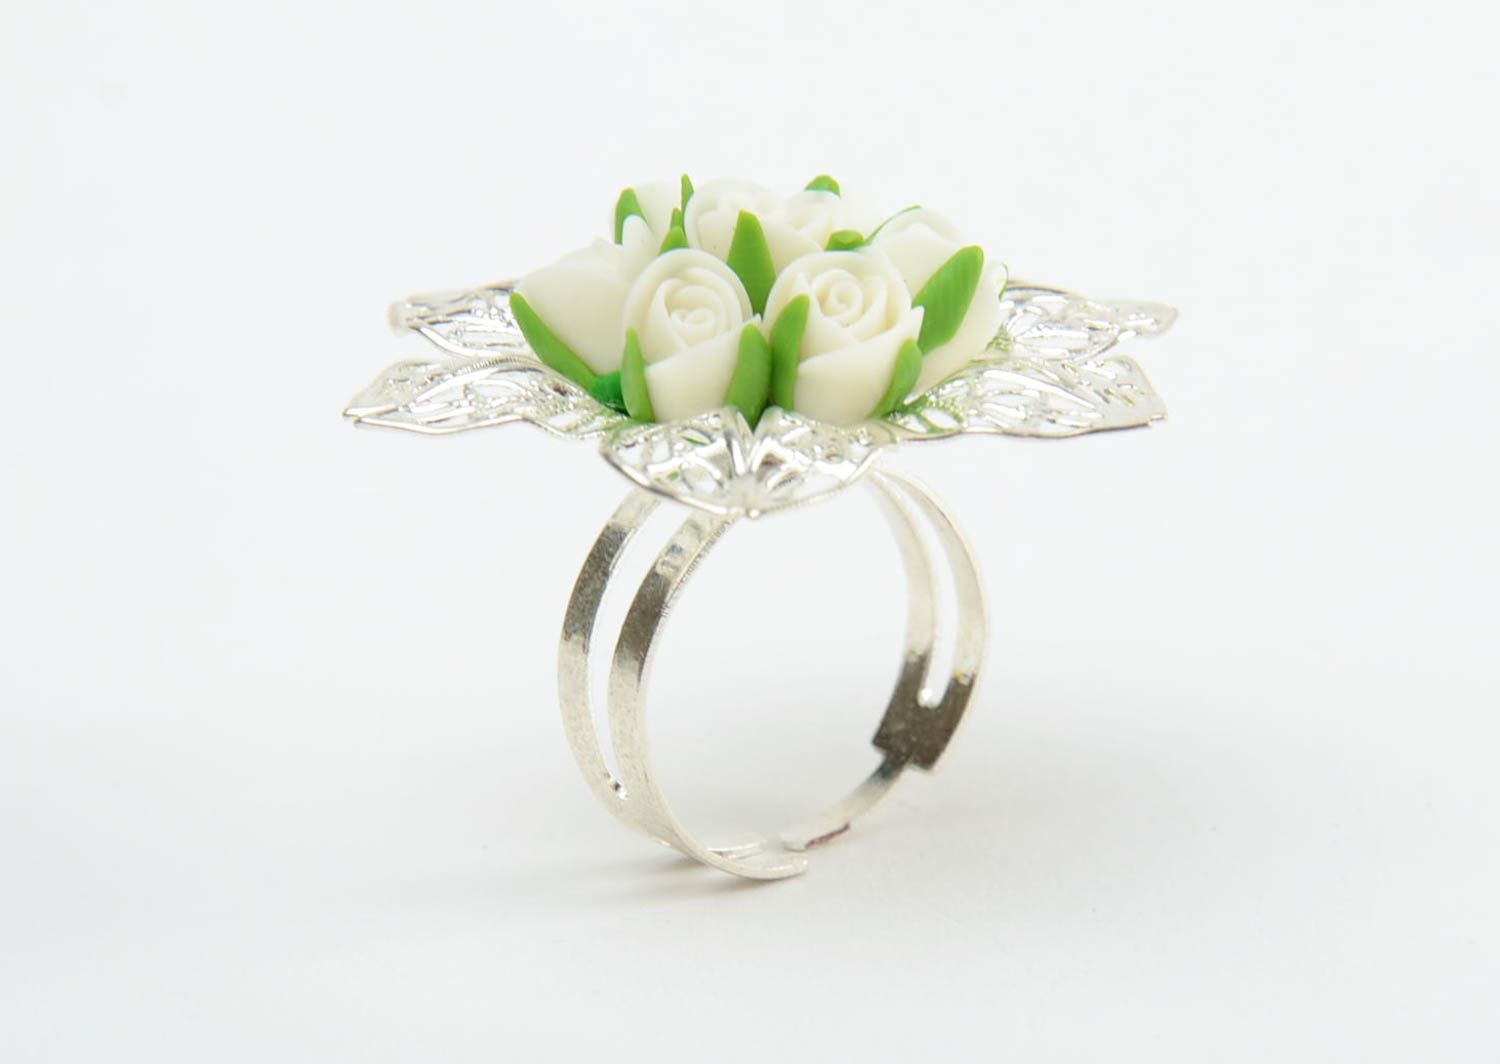 Handmade metal jewelry ring with large volume cold porcelain white rose flowers photo 4